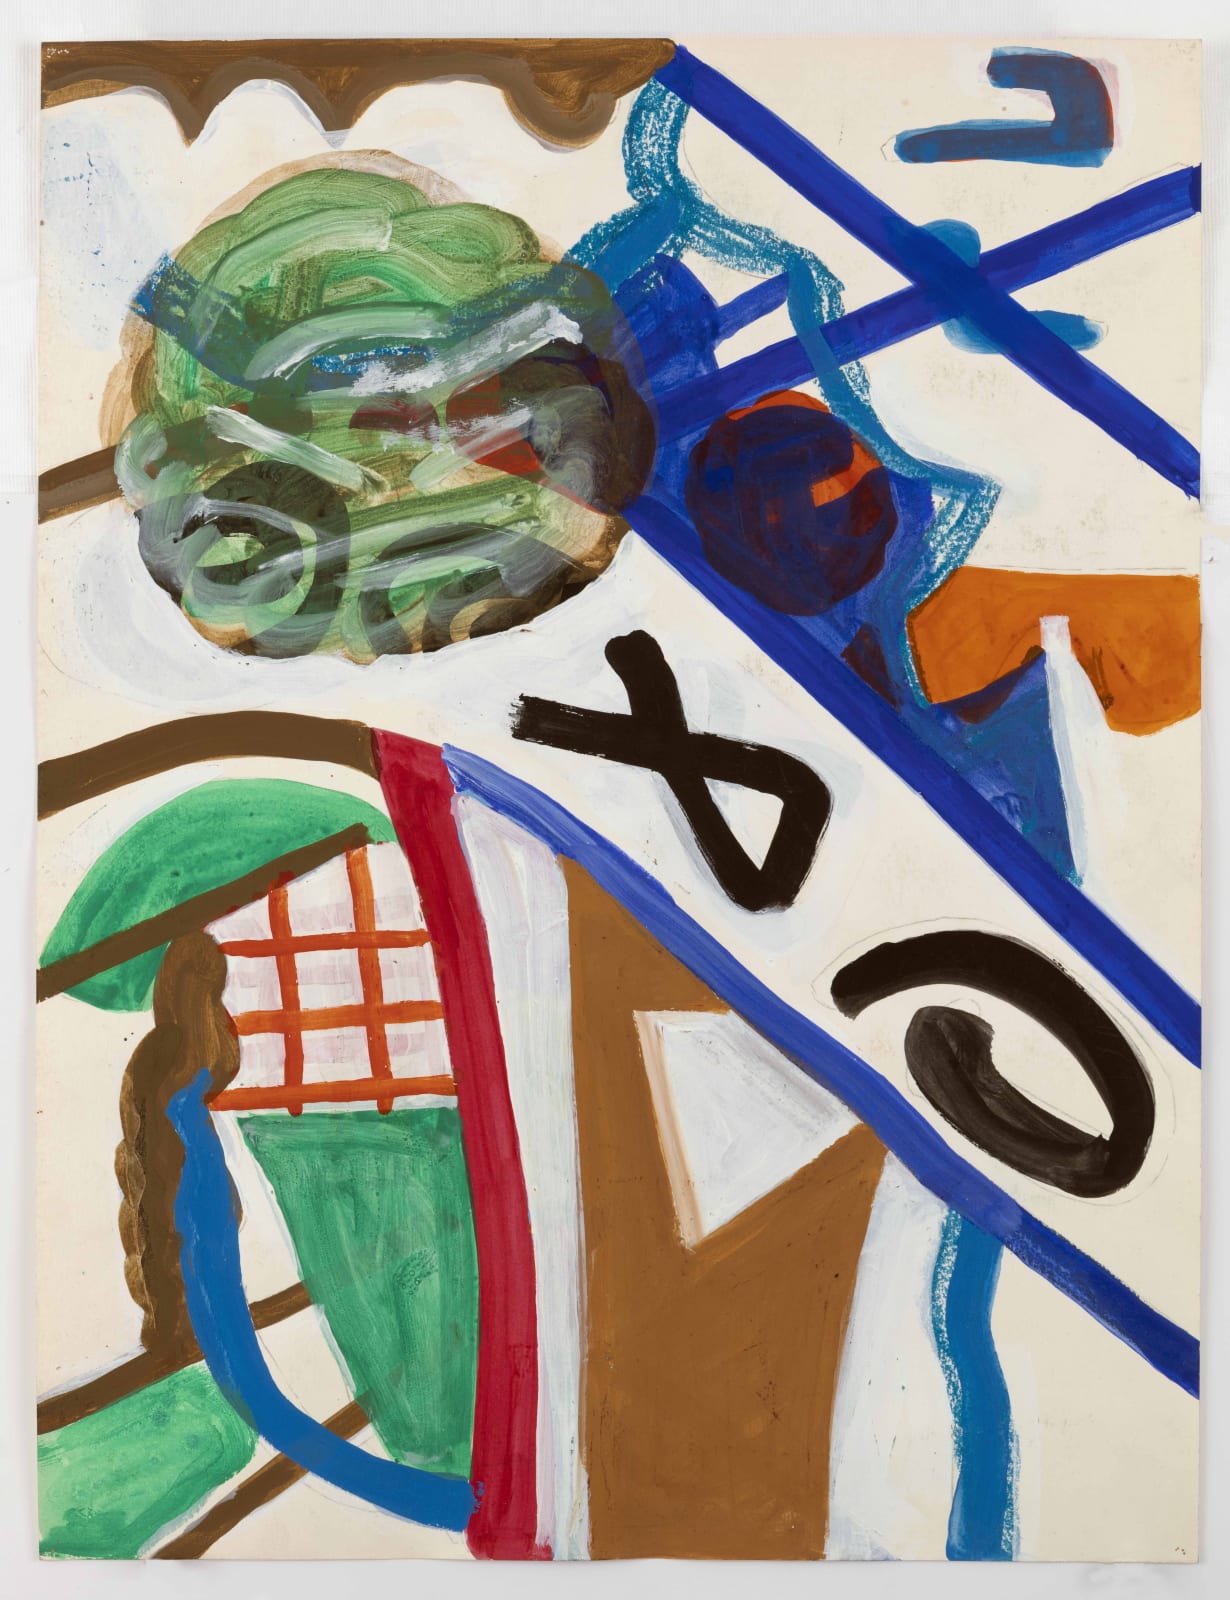 Shirley Jaffe Untitled, 1980 ca. Mixed media on paper 77,2 x 61 x 3,5 cm (30 13/32 x 24 1/32 x 1 3/8 in) framed